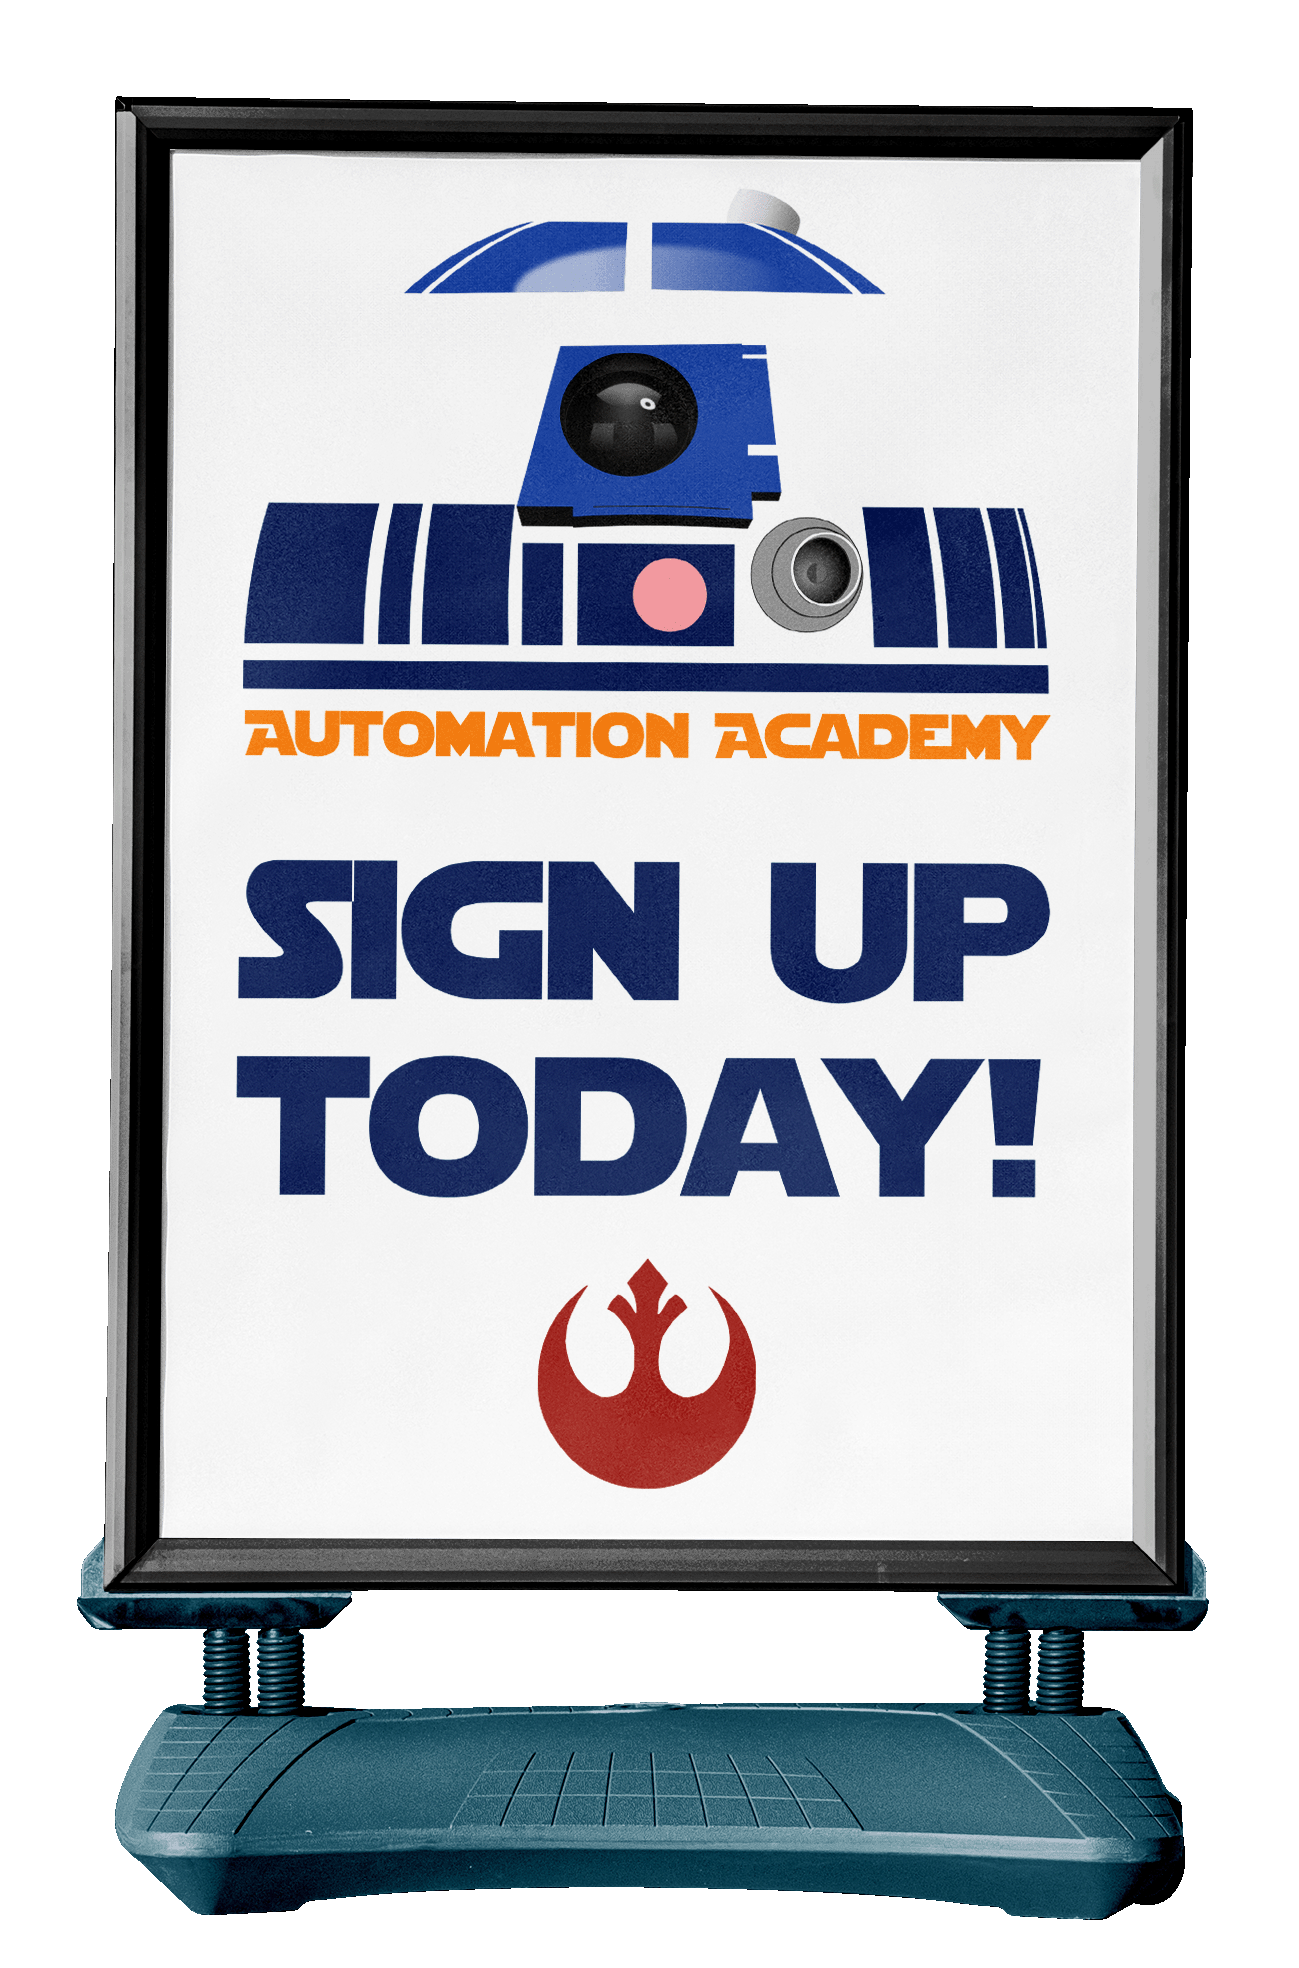 Poster for "Automation Academy" with the text "Sign up today".